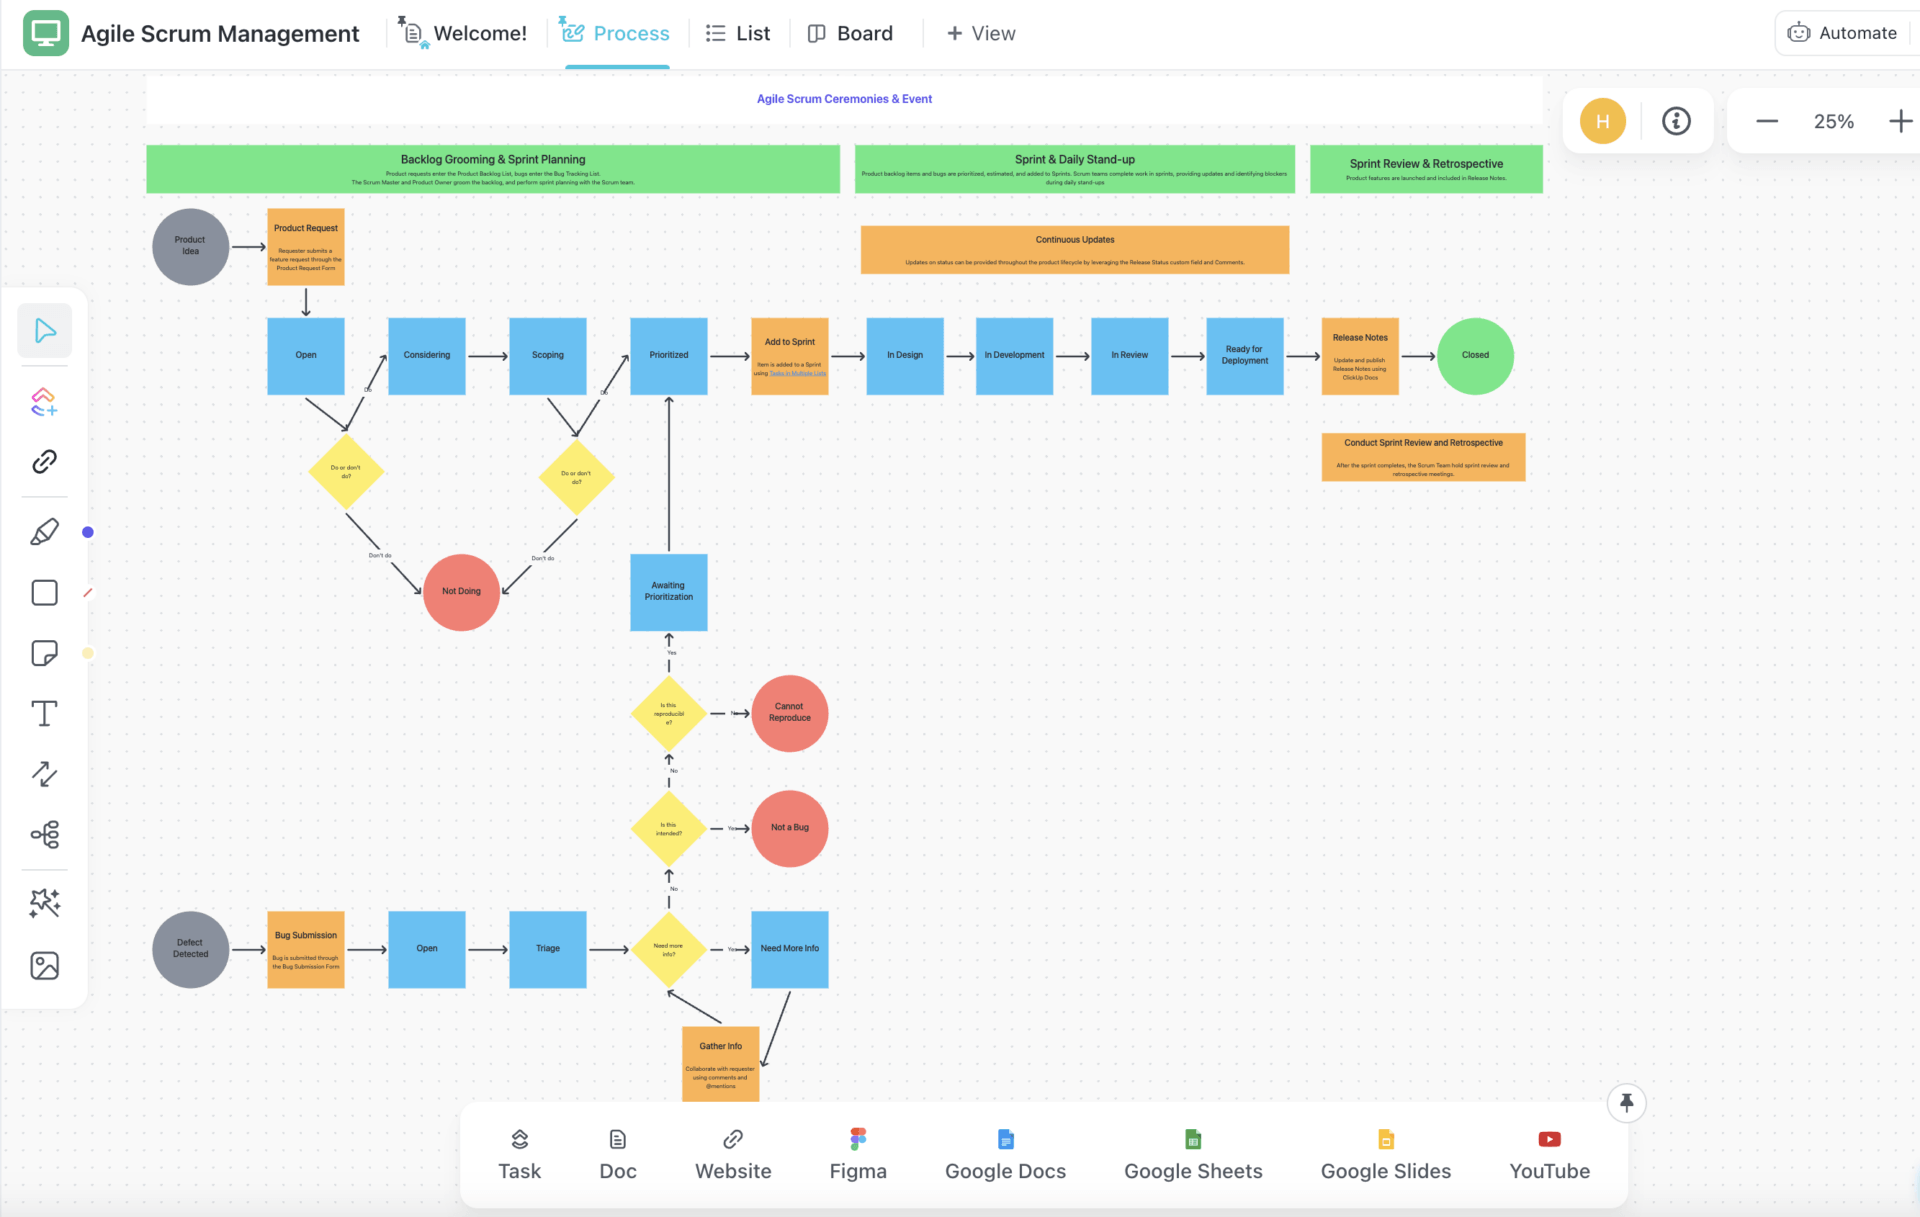 This advanced template offers 30 color-coded statuses for effective scrum management